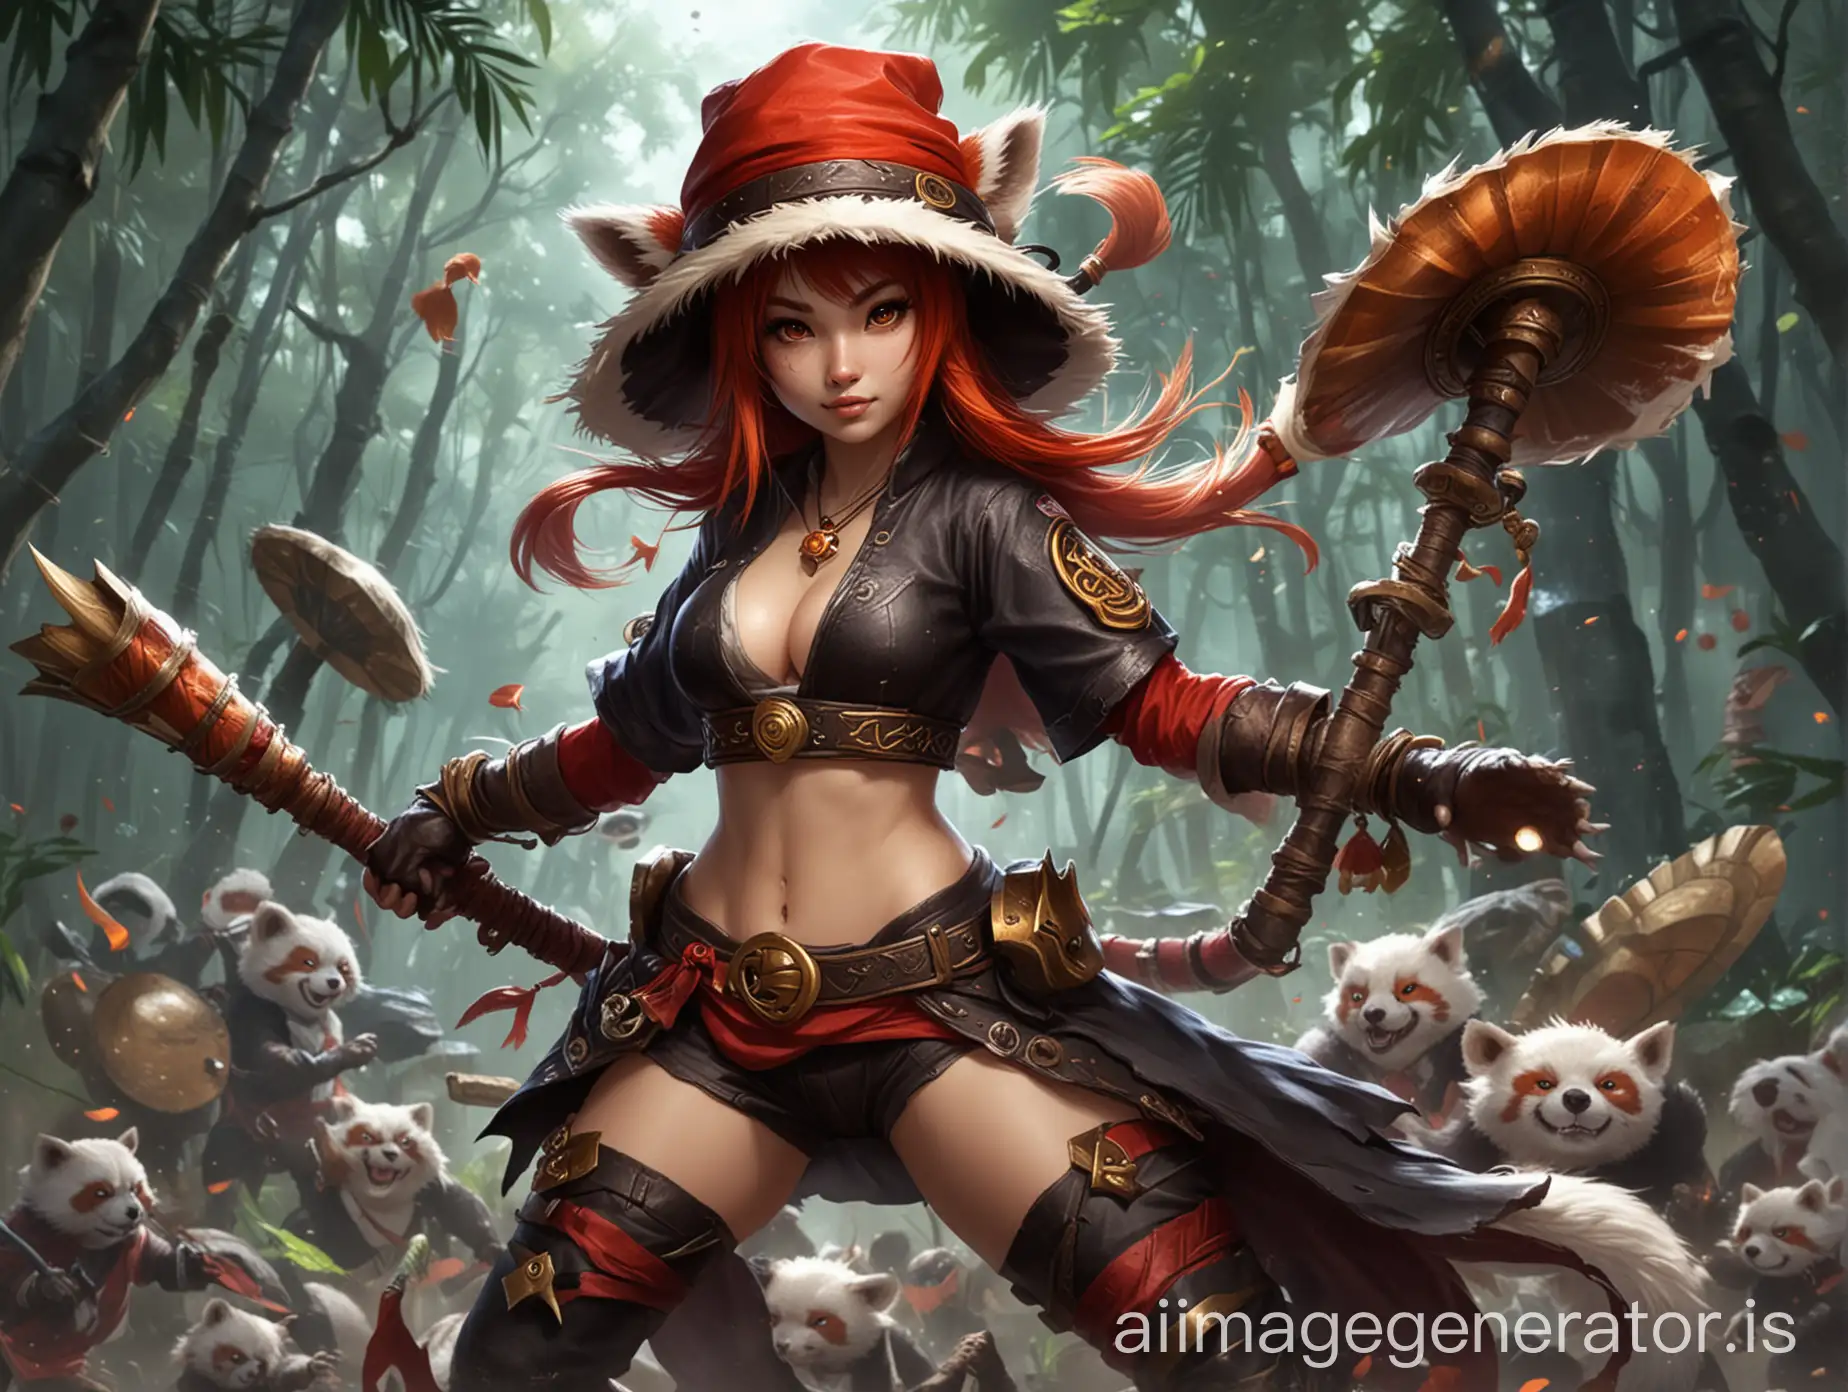 leauge of legends champion and her skill is based on yin and yang. she needs to be red panda character with a conical vietnam hat. Around her yin and yang logo needs to be there. Age 20.